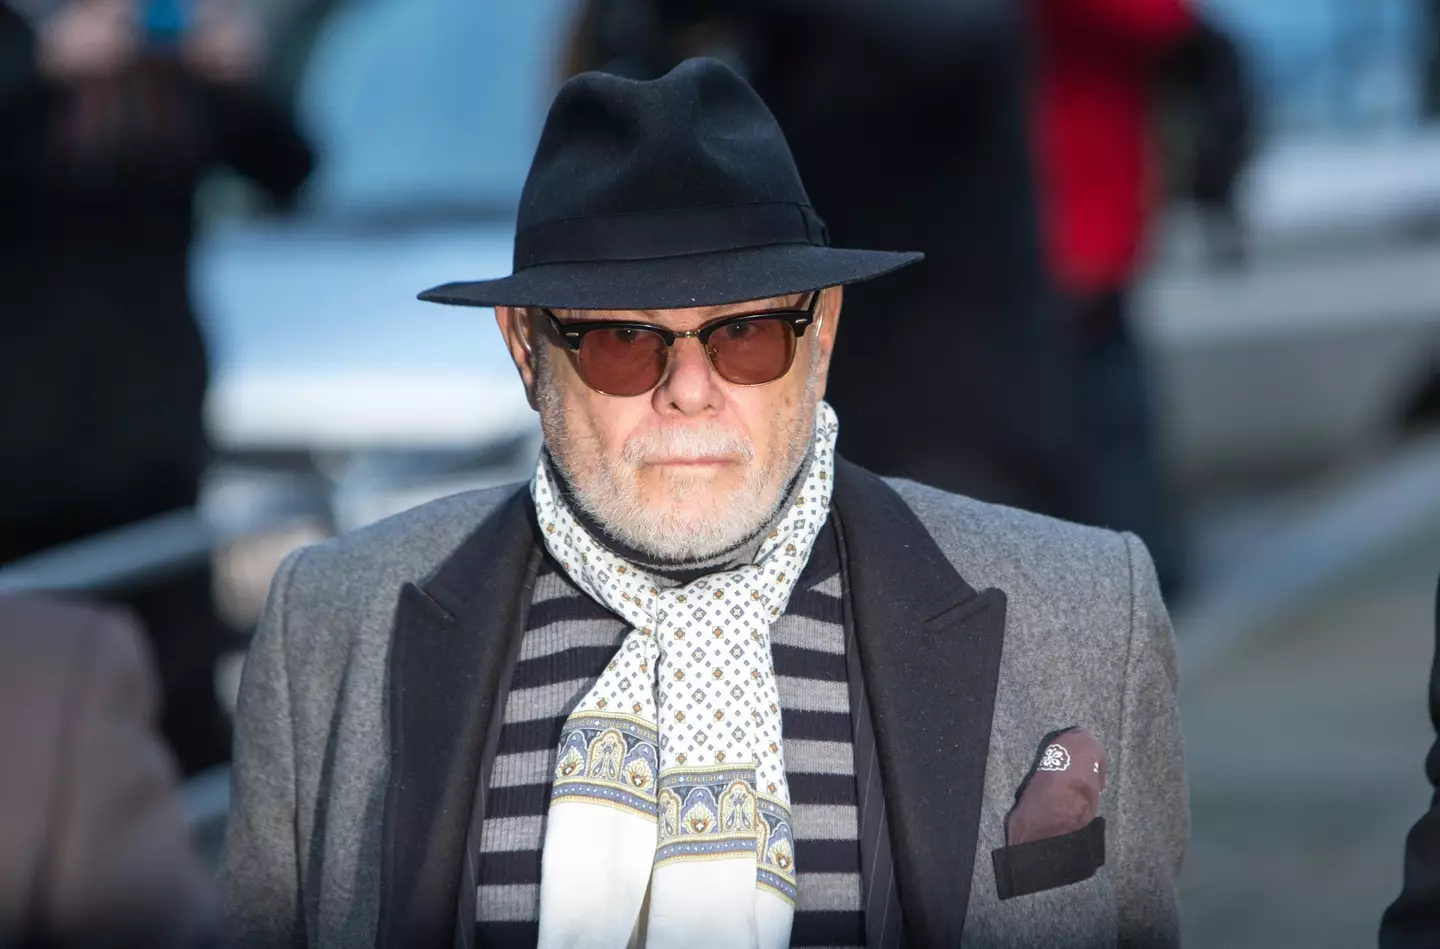 Gary Glitter was sent to prison in 2015.